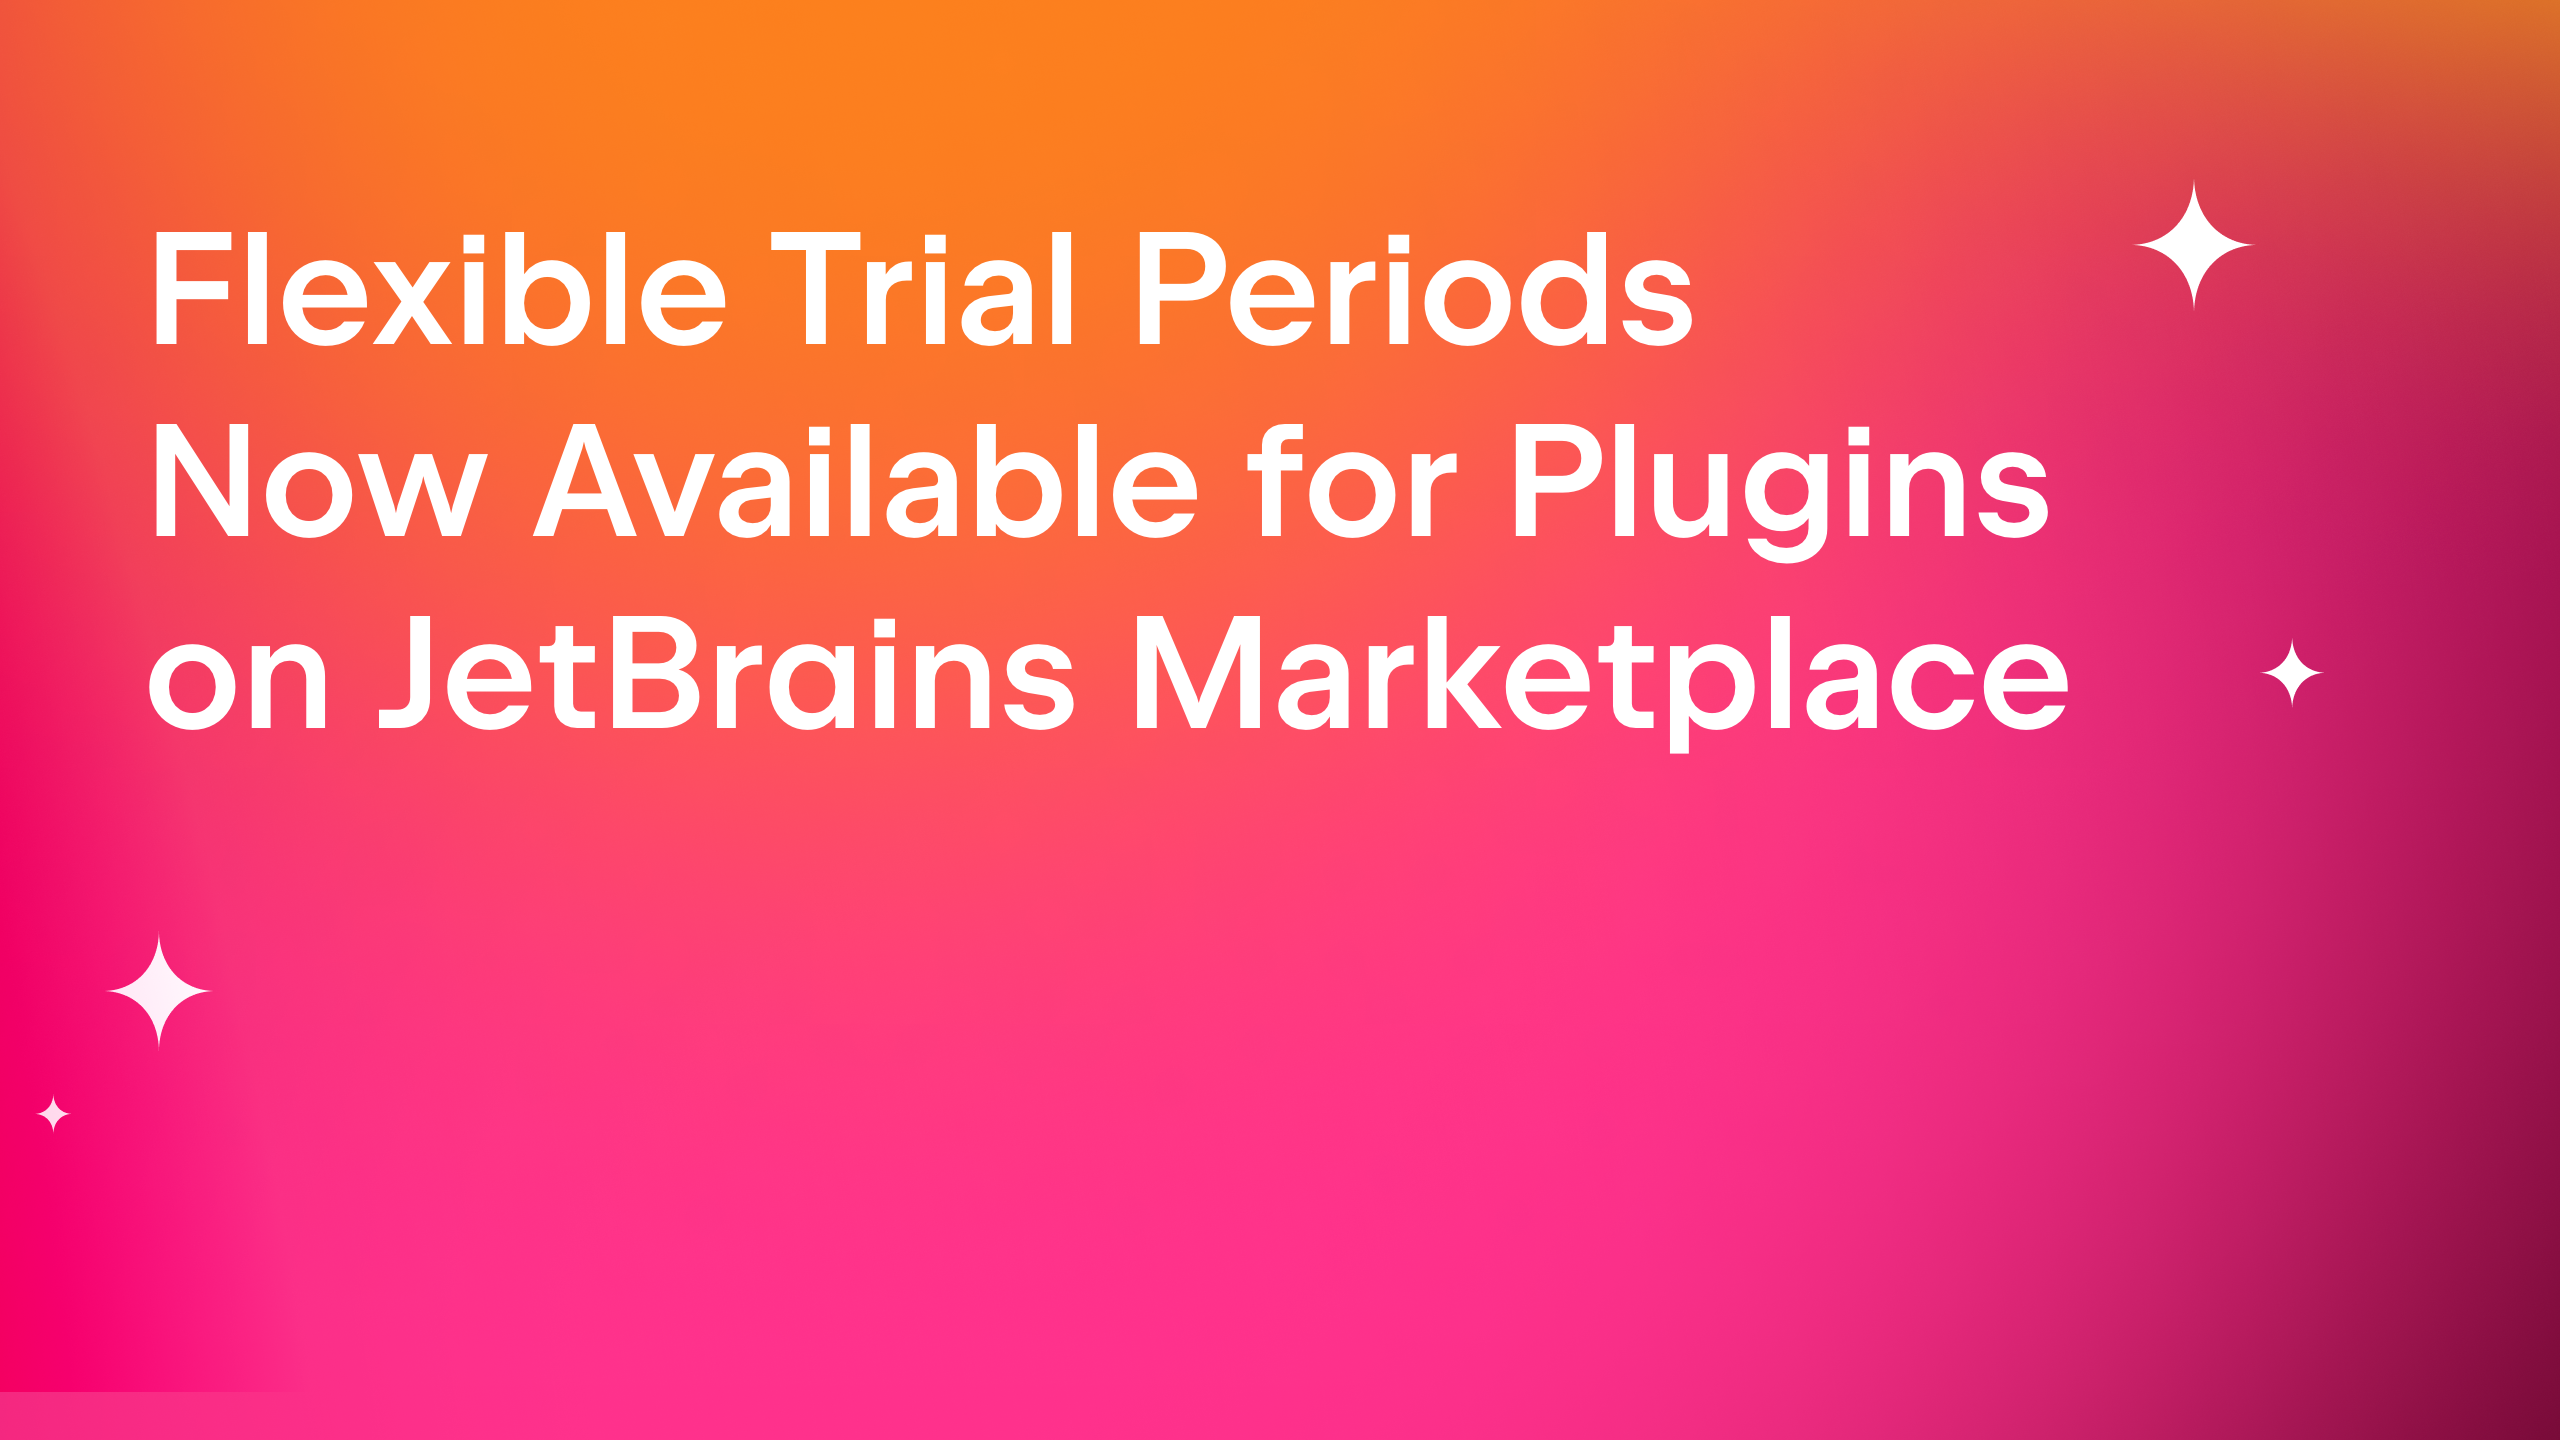 Flexible Trial Periods Now Available for Plugins on JetBrains Marketplace